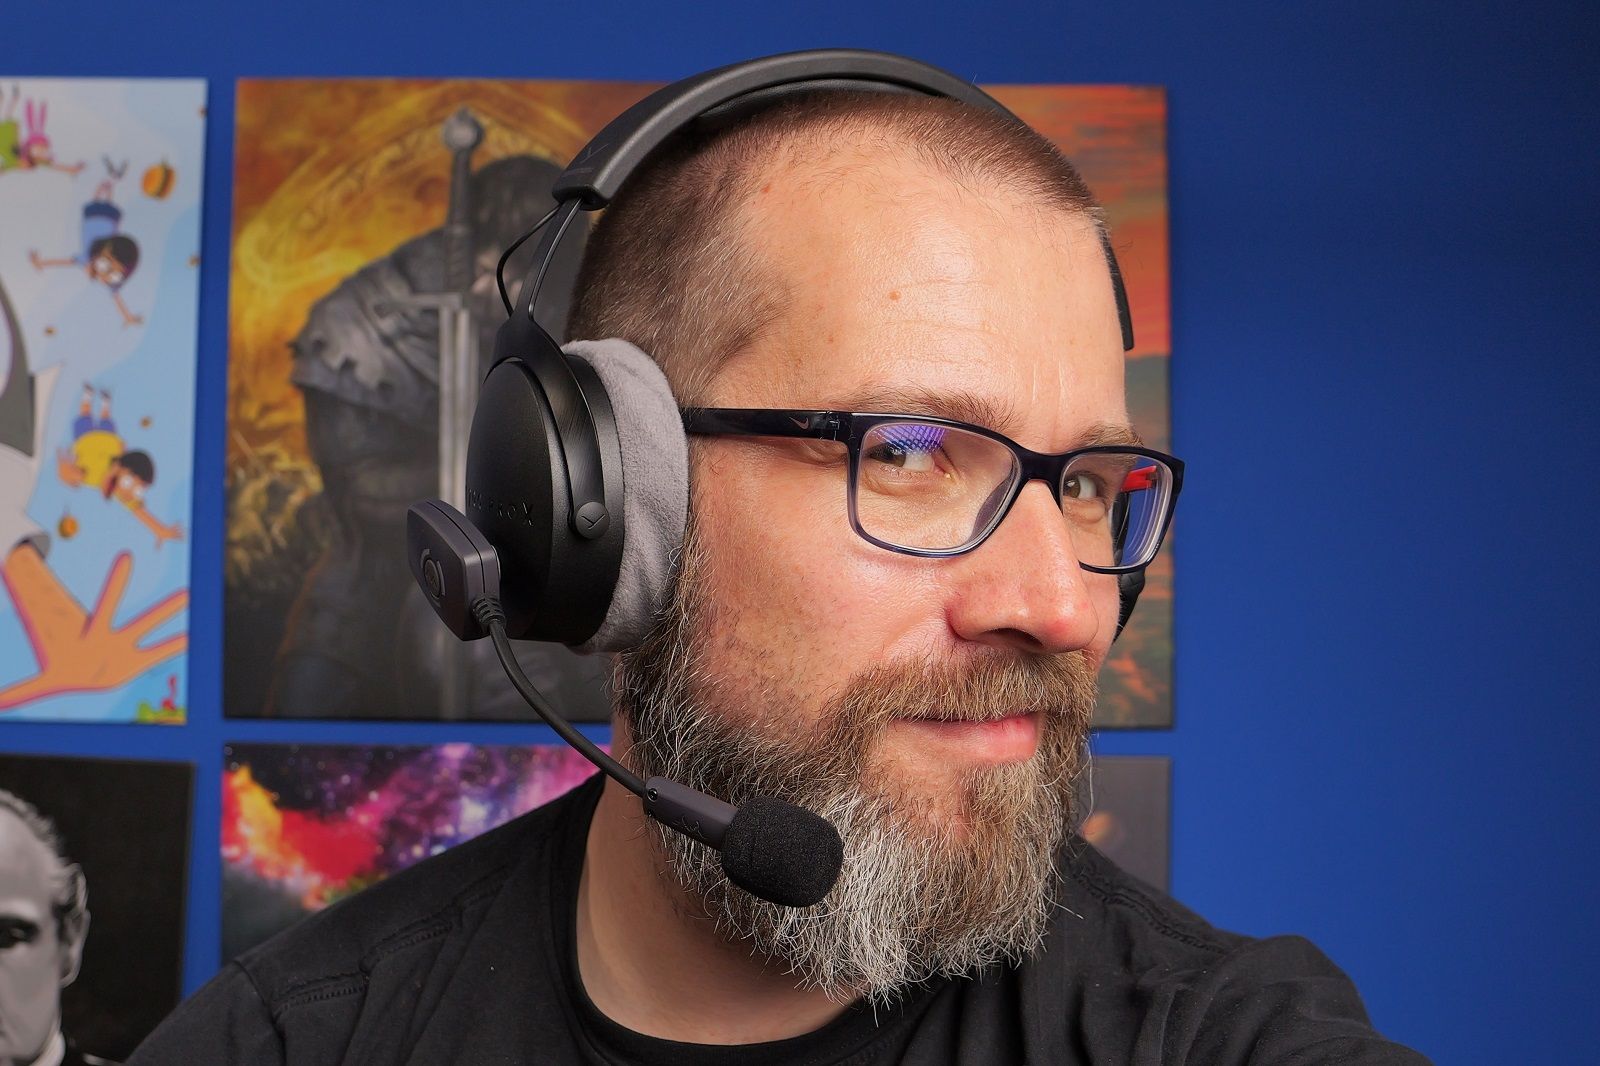 How to add a mic to any headphones for PC gaming photo 3